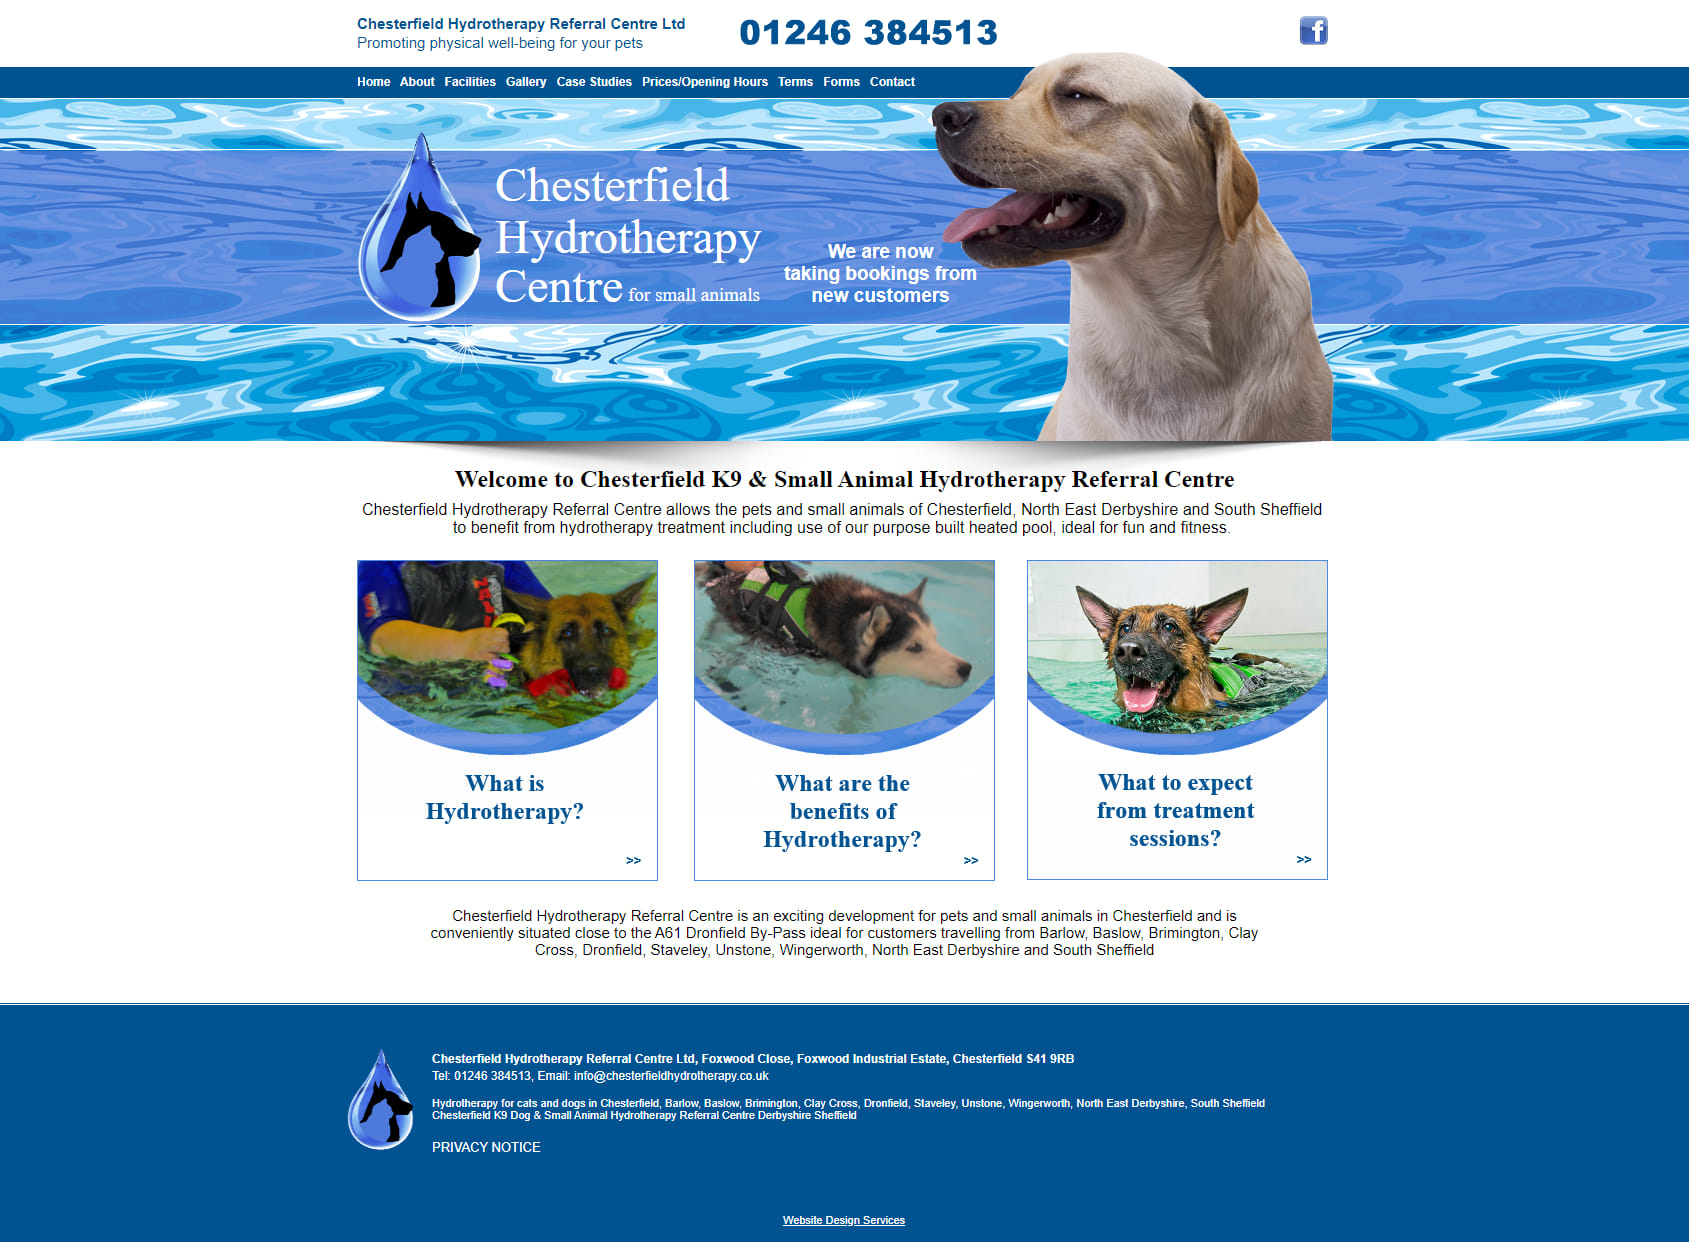 Chesterfield Hydrotherapy Referral Centre